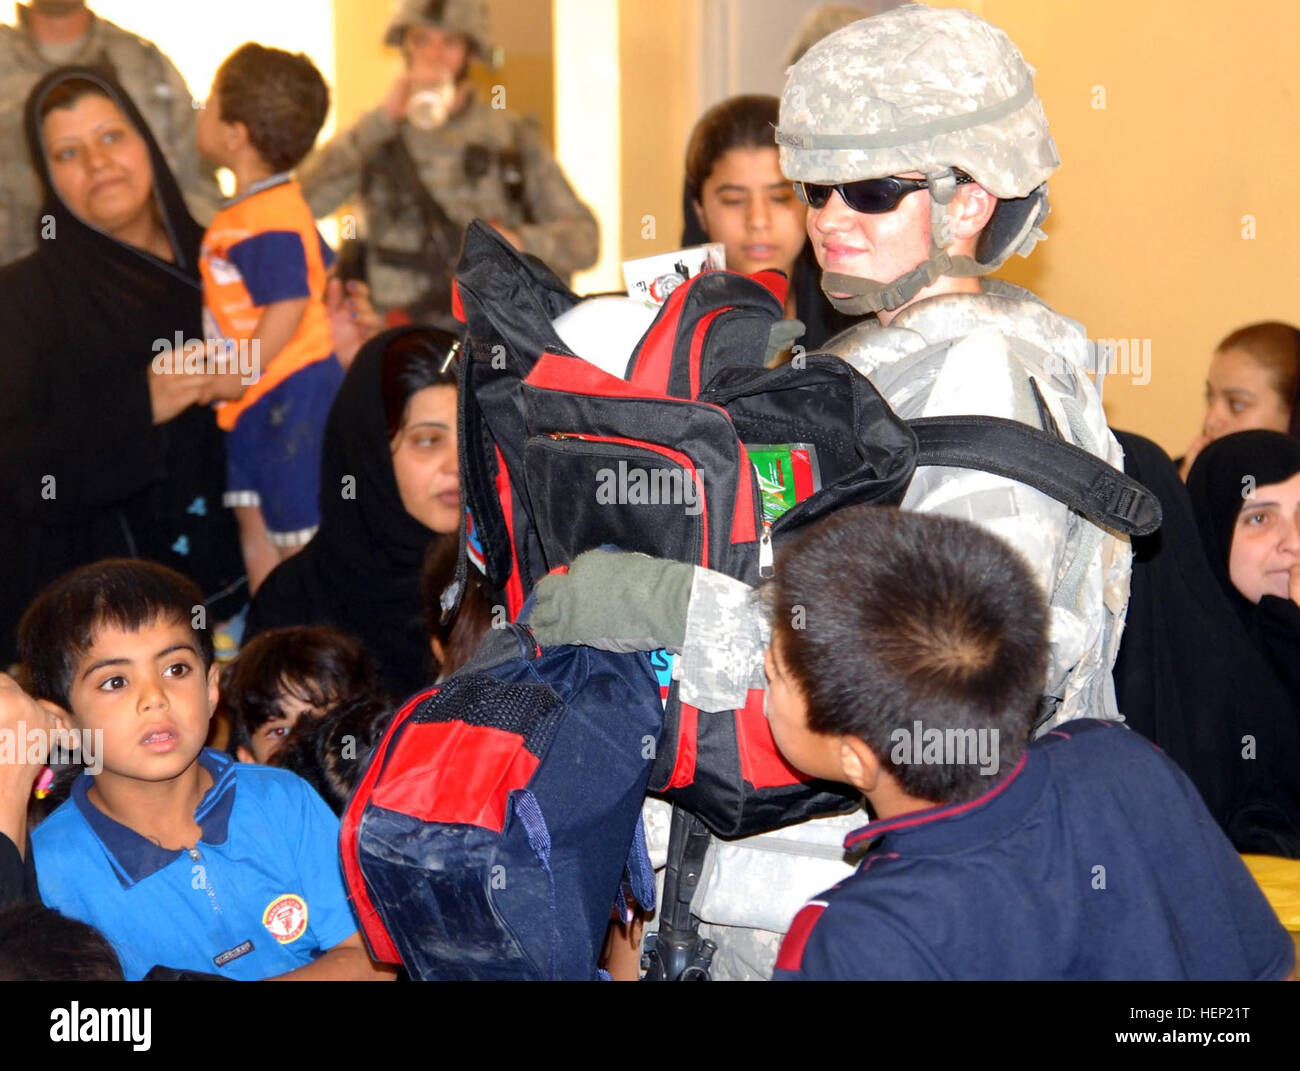 Cpl. Brandi Tennison, 64th Military Police Company, who is a native of Dallas, hands out school supplies to local children of Hurriyah on June 12. The 64th MP Co., is deployed from Fort Hood, Texas, and is currently assigned to the 716th MP Battalion, 18th MP Bde., MND-B. IP making difference in local Baghdad community 94496 Stock Photo